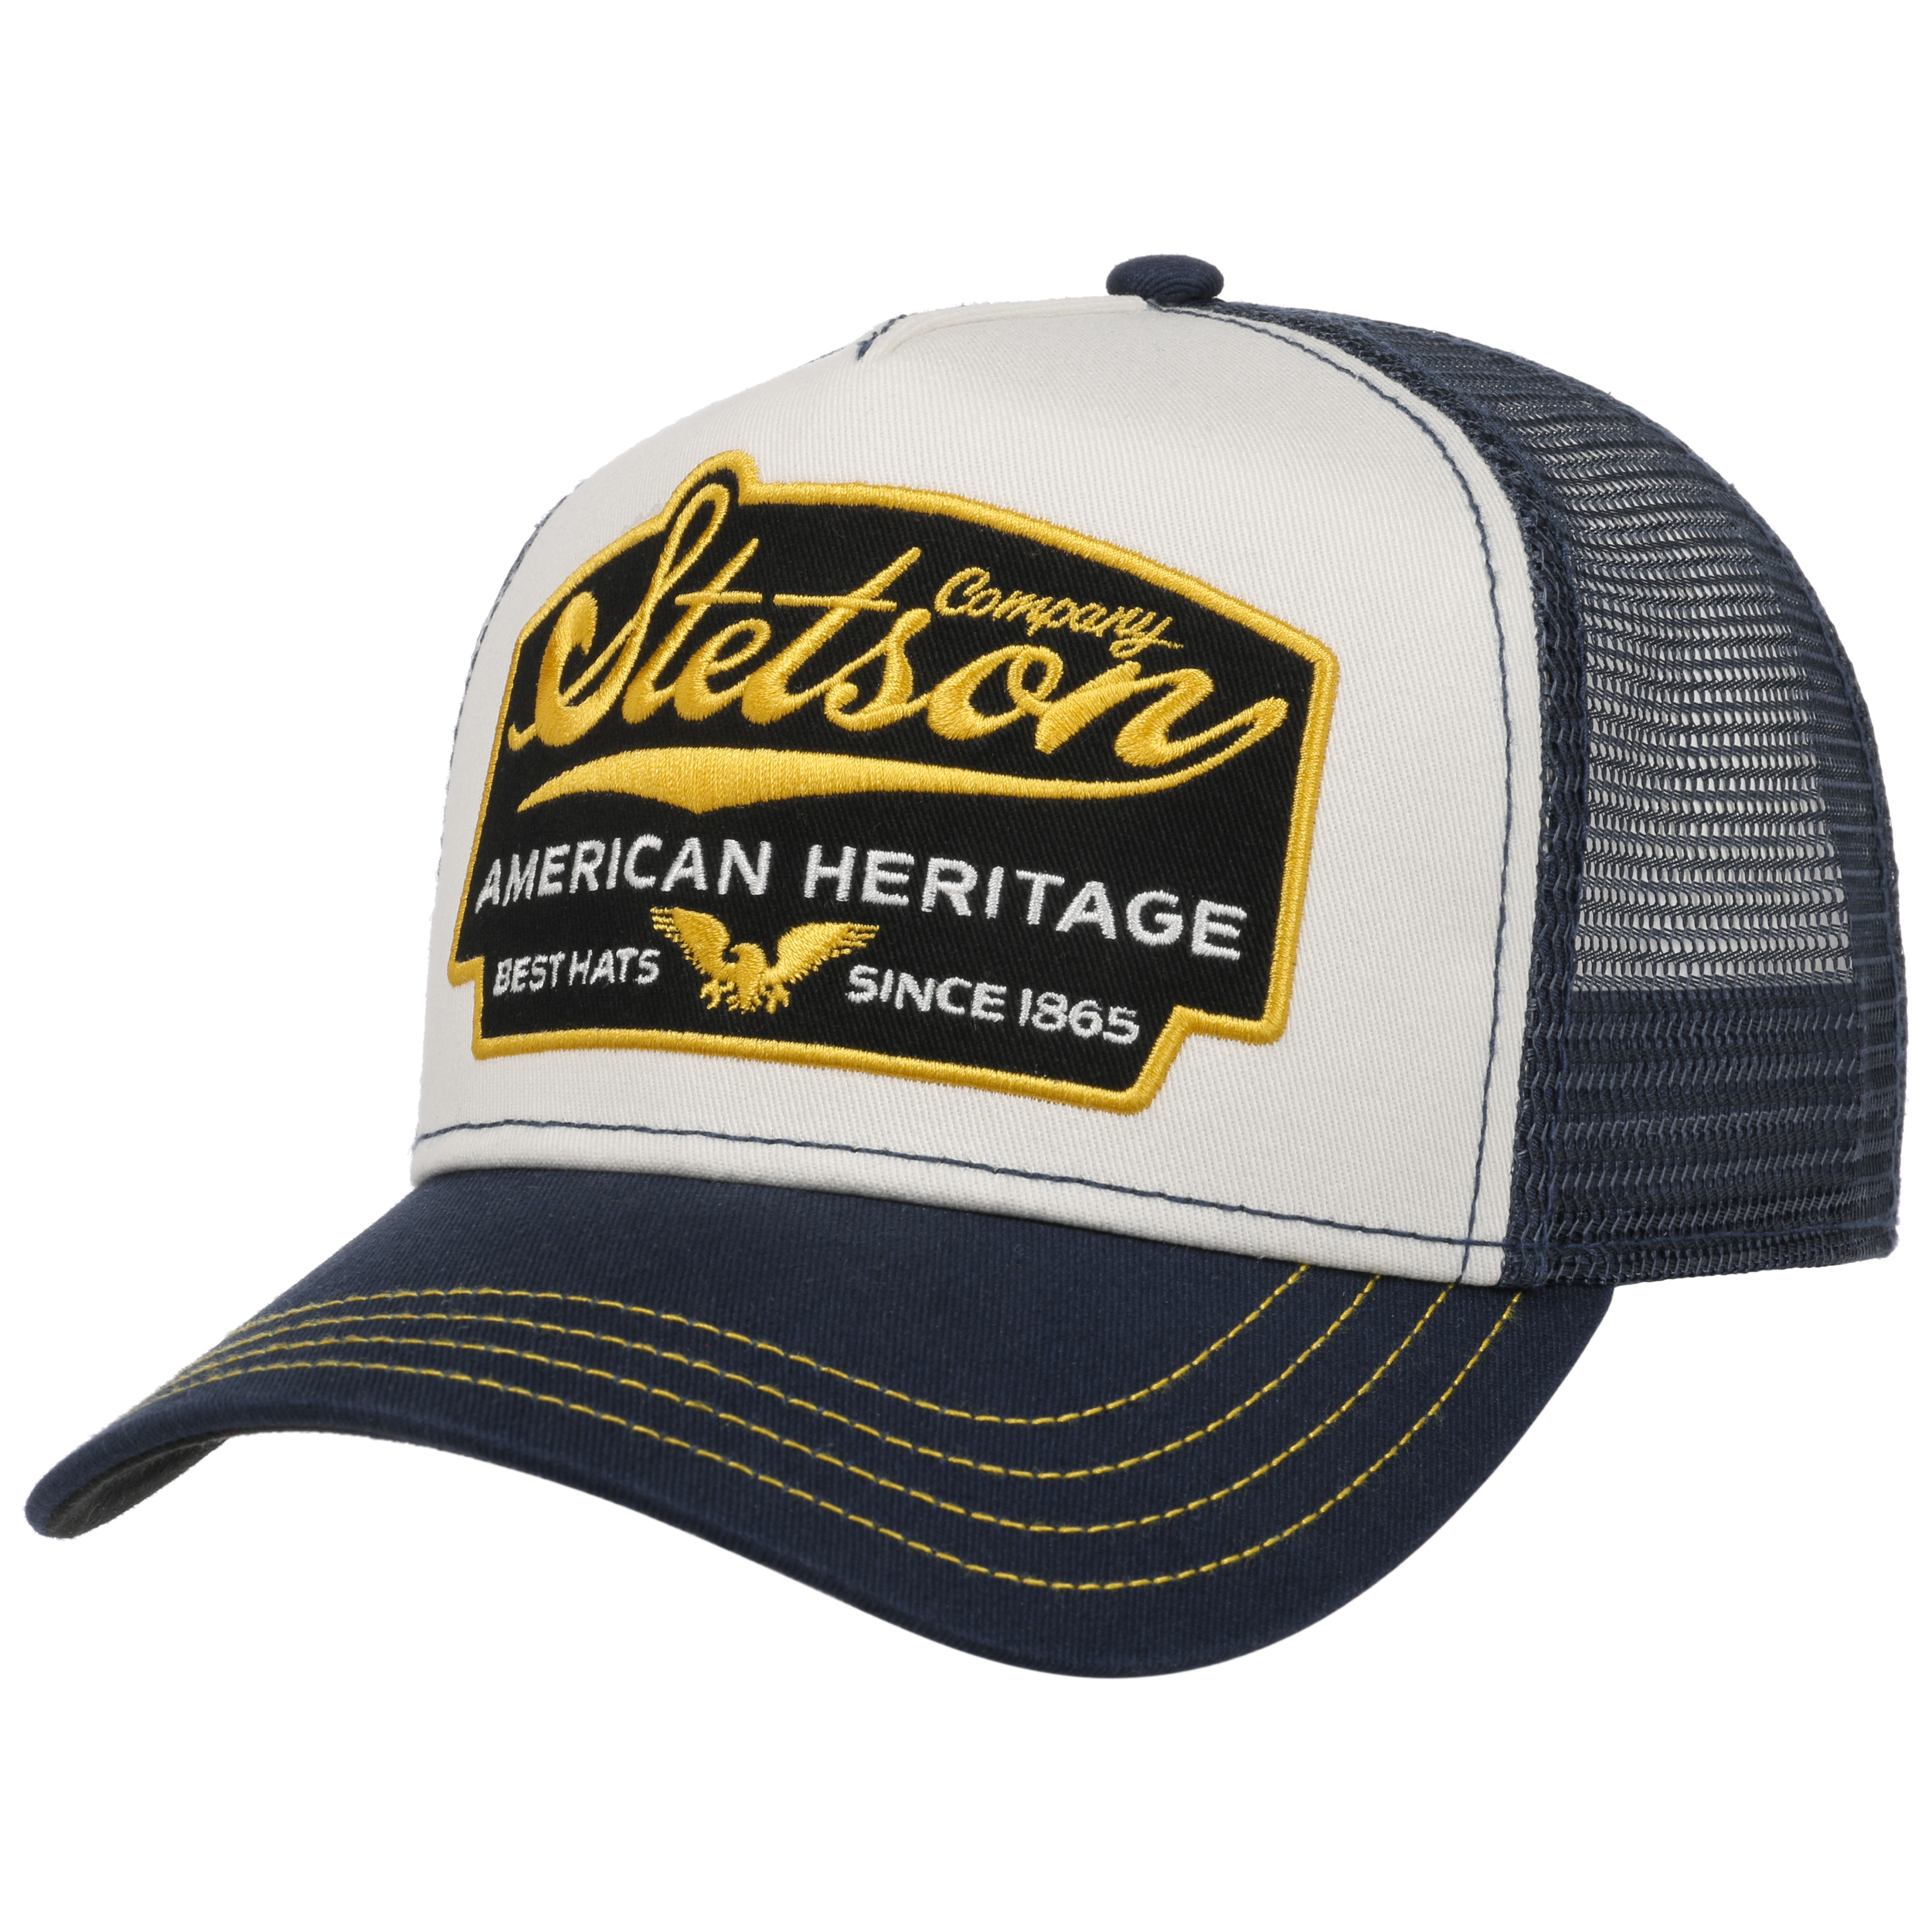 als papier Monumentaal American Heritage Trucker Pet by Stetson - 49,00 €